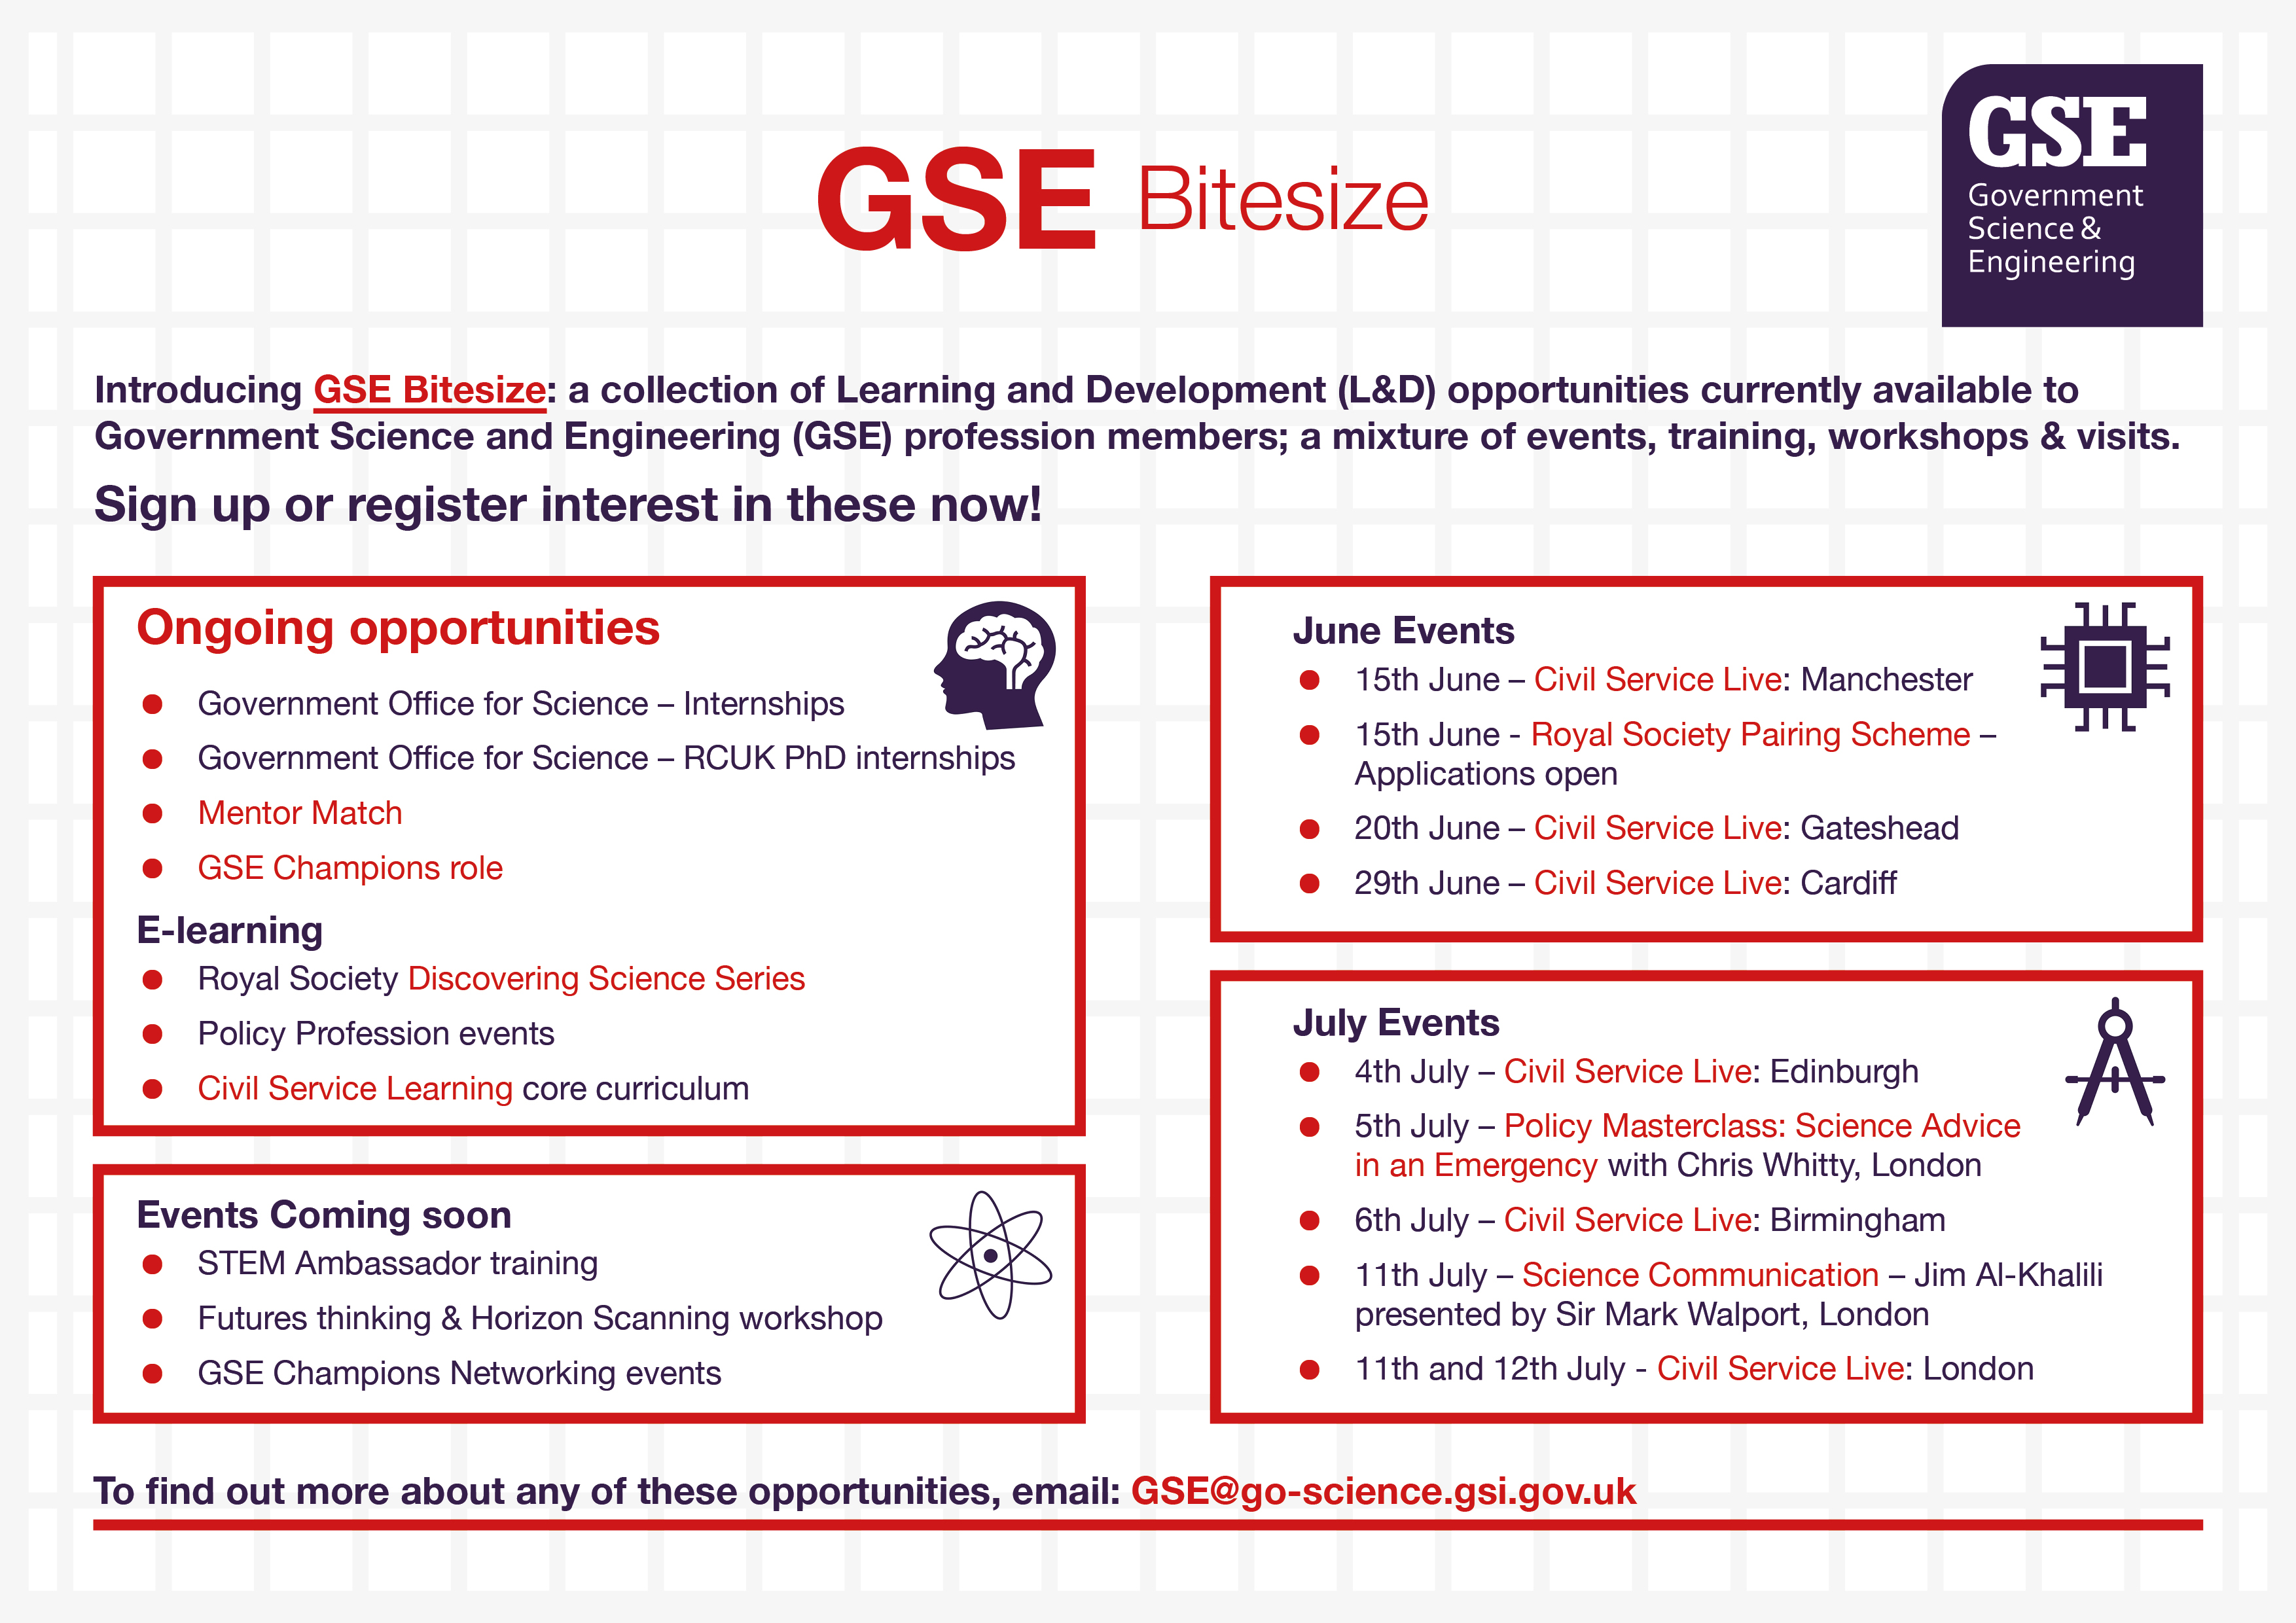 A collection of GSE opportunties